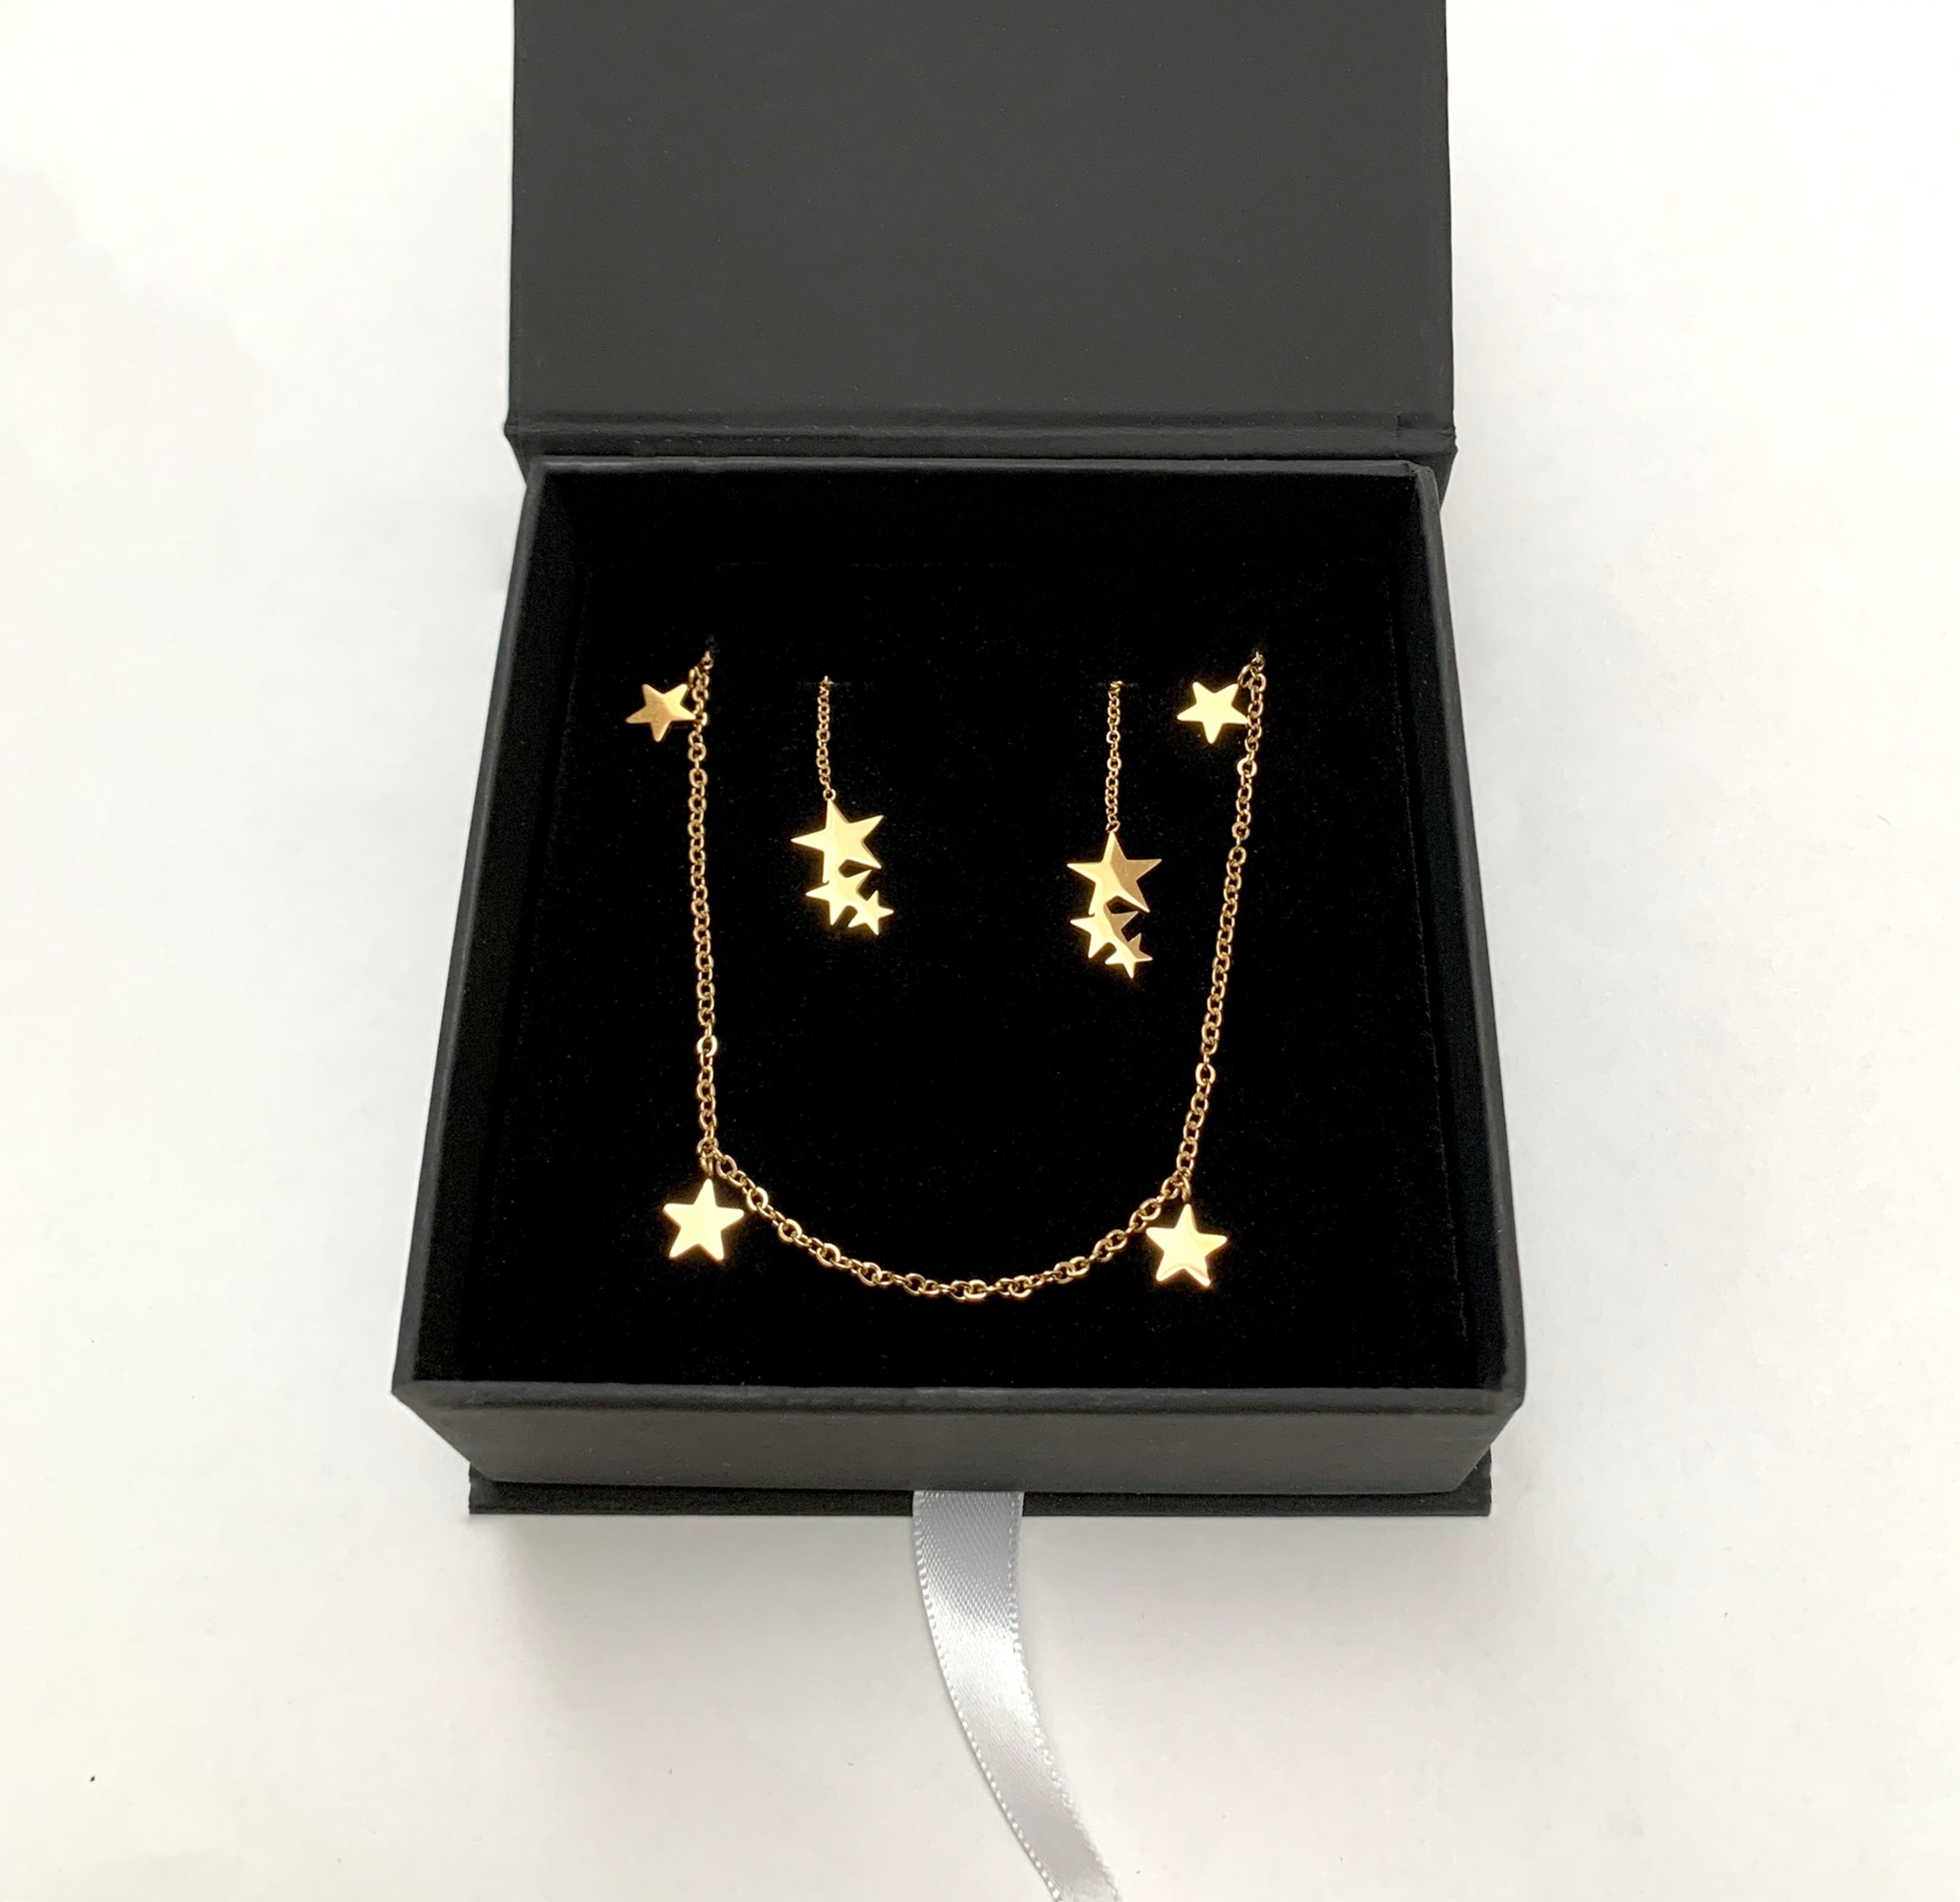 Star earring and necklace set waterproof gold jewelry